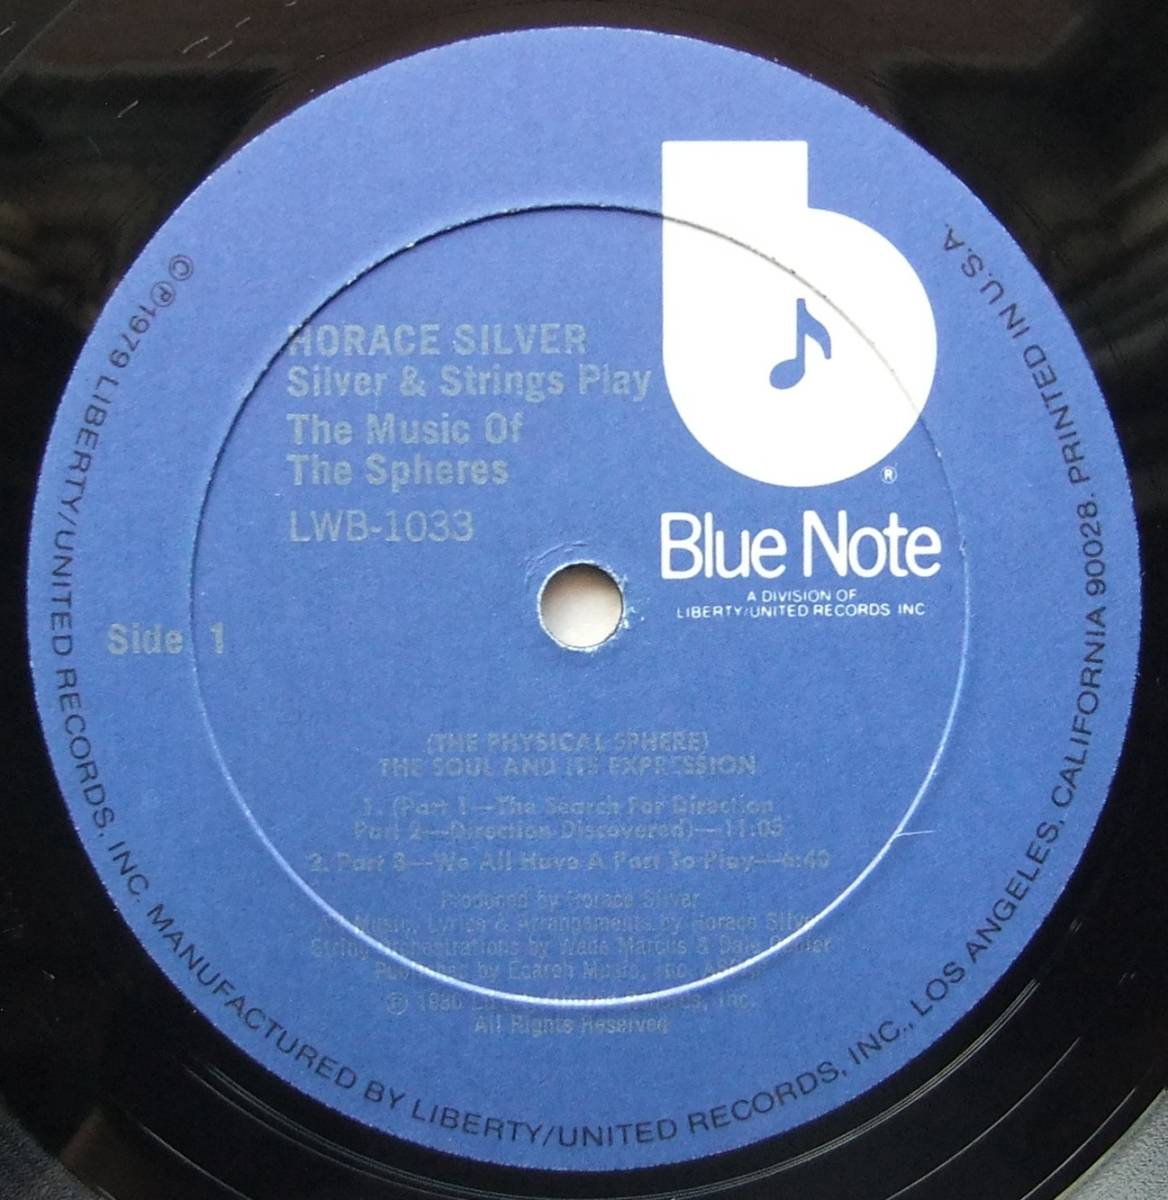 ◆ HORACE SILVER / Silver 'N Play The Music of the Spheres (2 LP) ◆ Blue Note LWB-1033 ◆ V